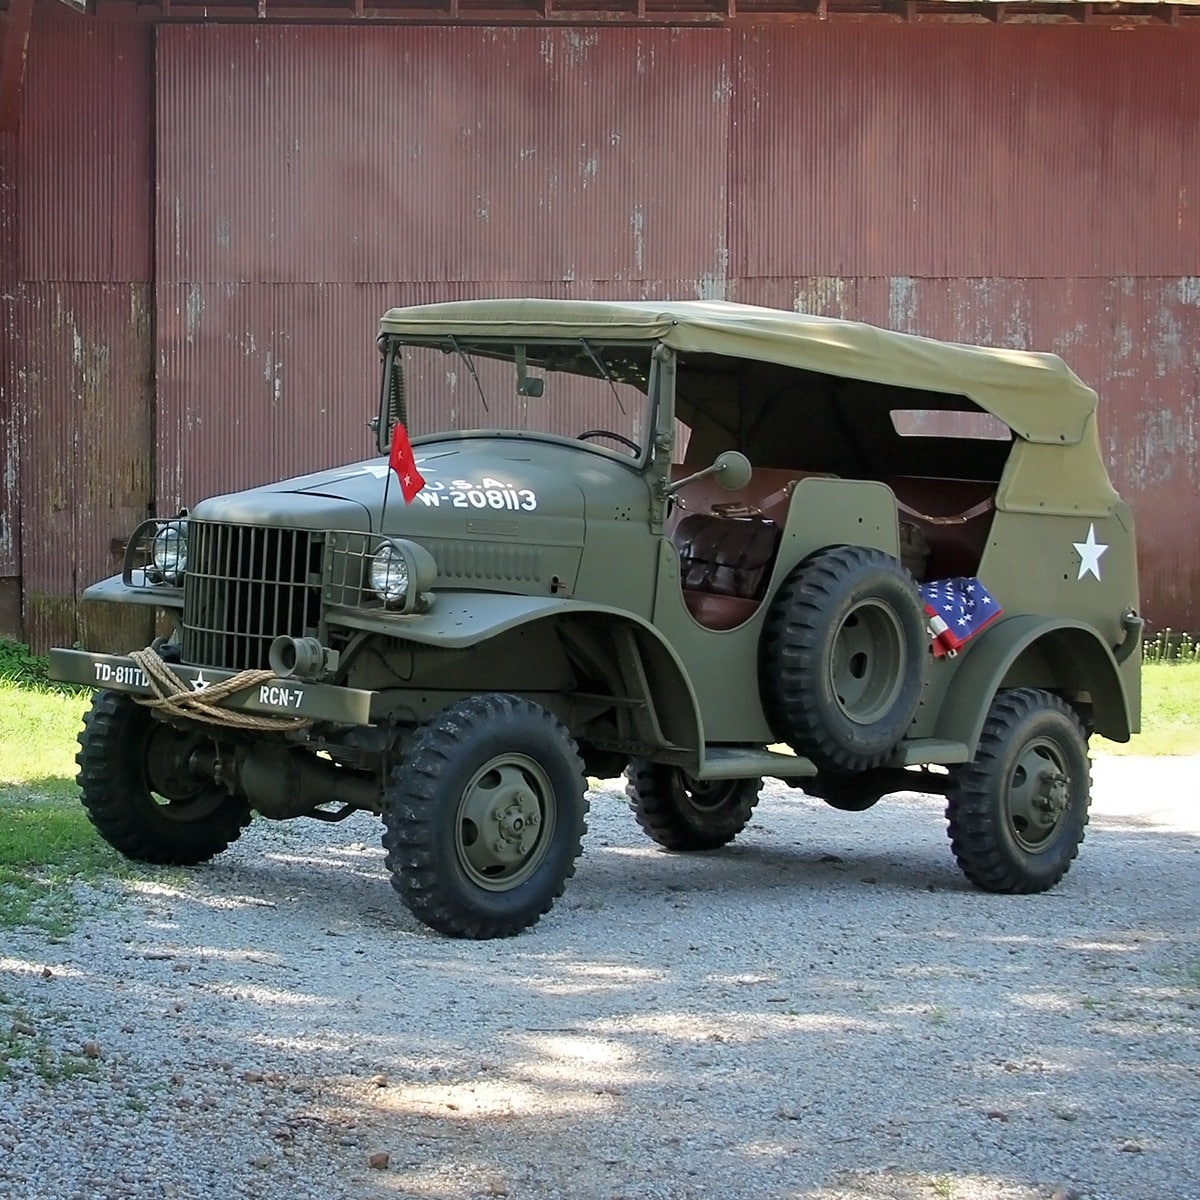 1941 Command Car in front of red barn